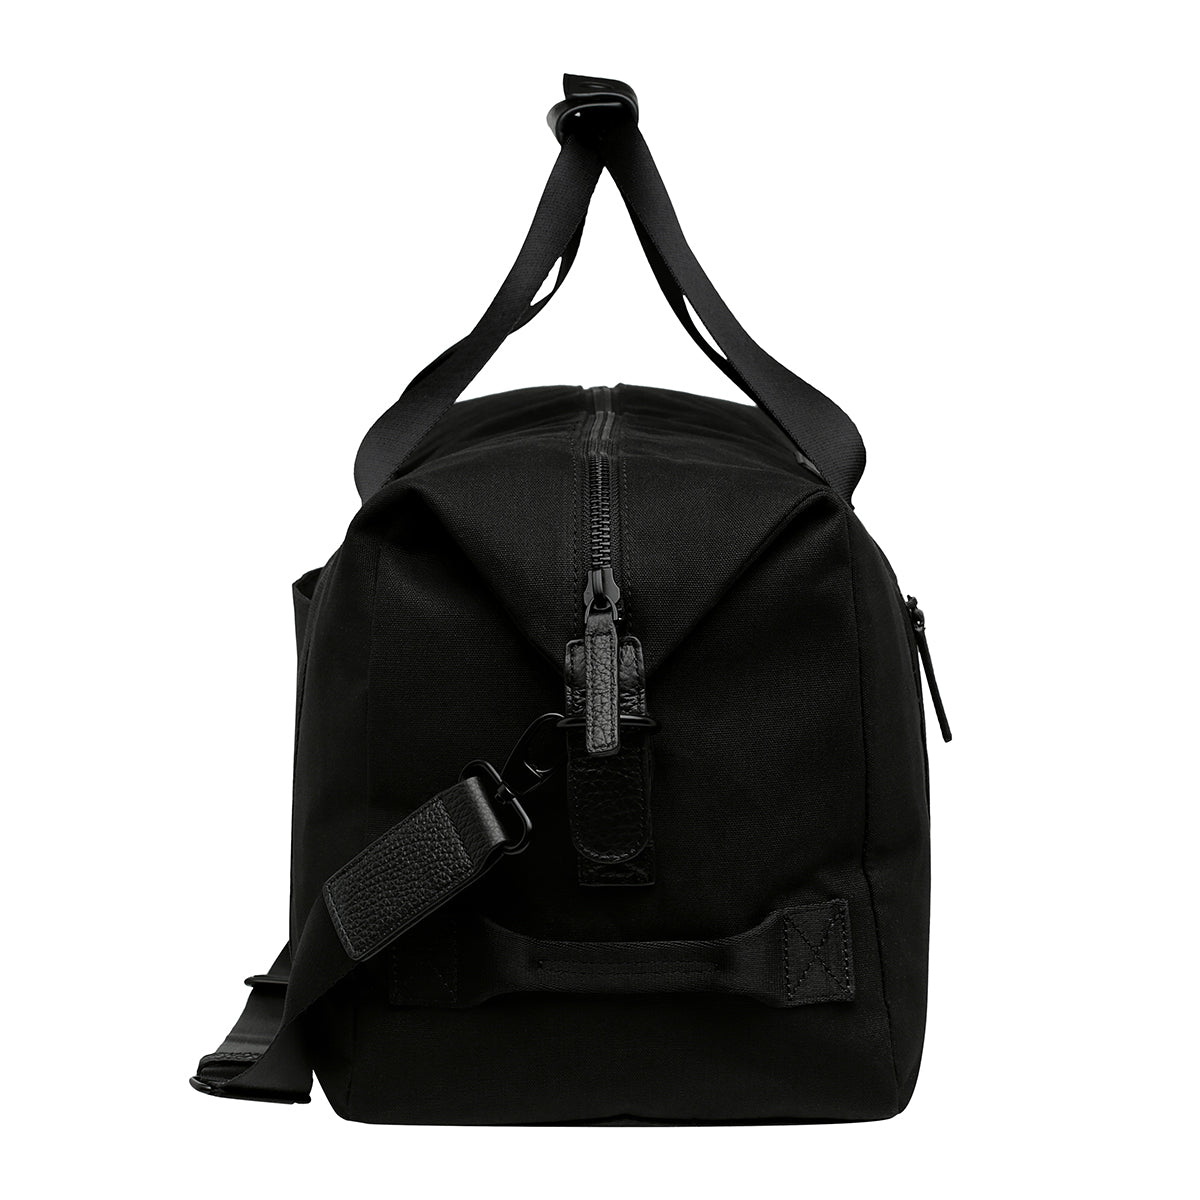 Status Anxiety everything I wanted duffle bag canvas black